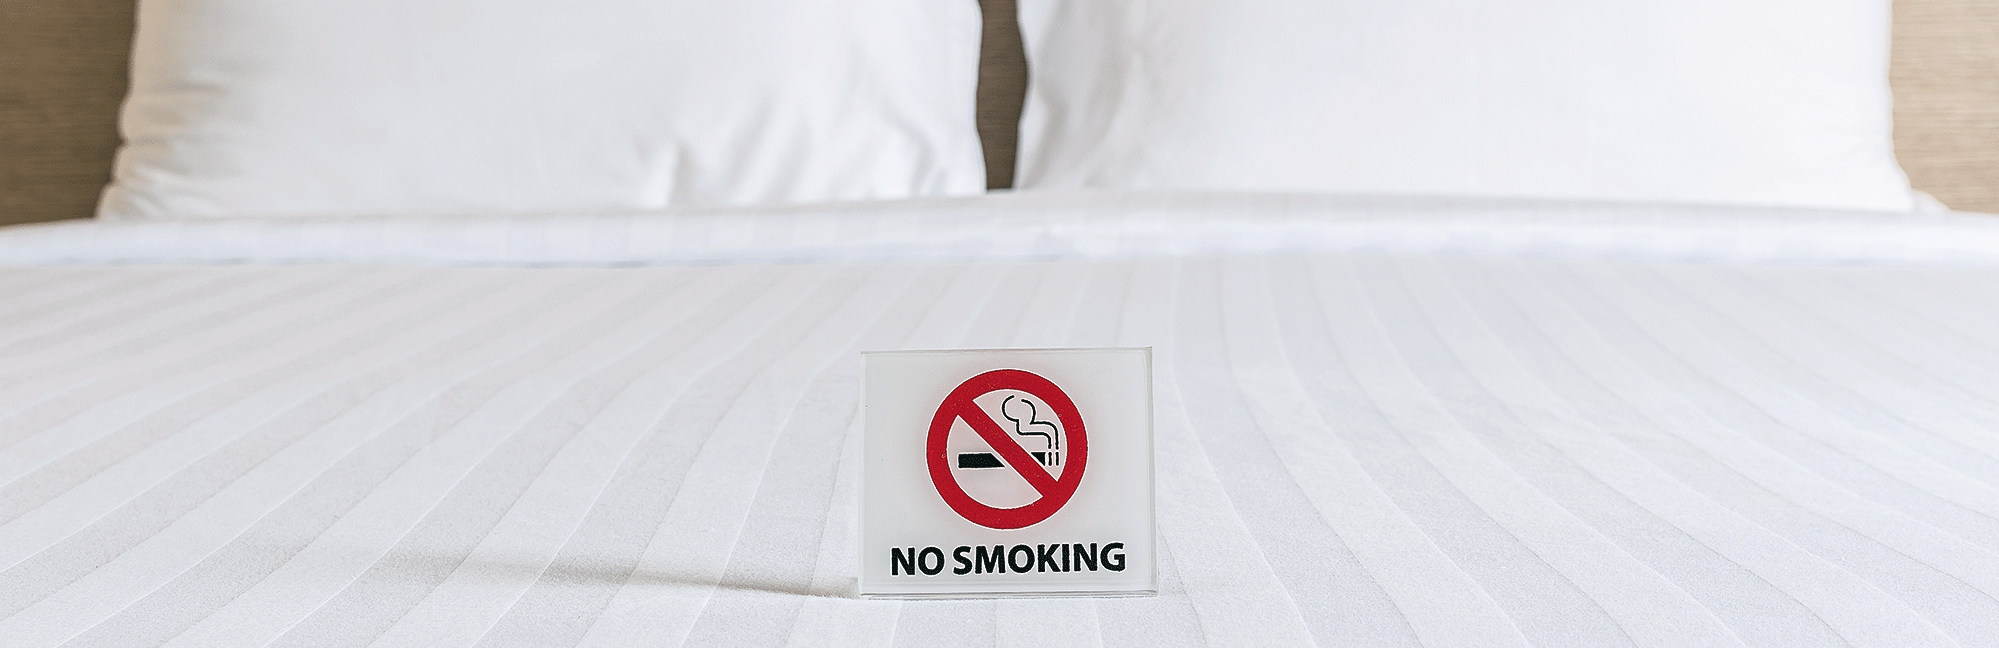 Tips for Smoking in a Hotel Room